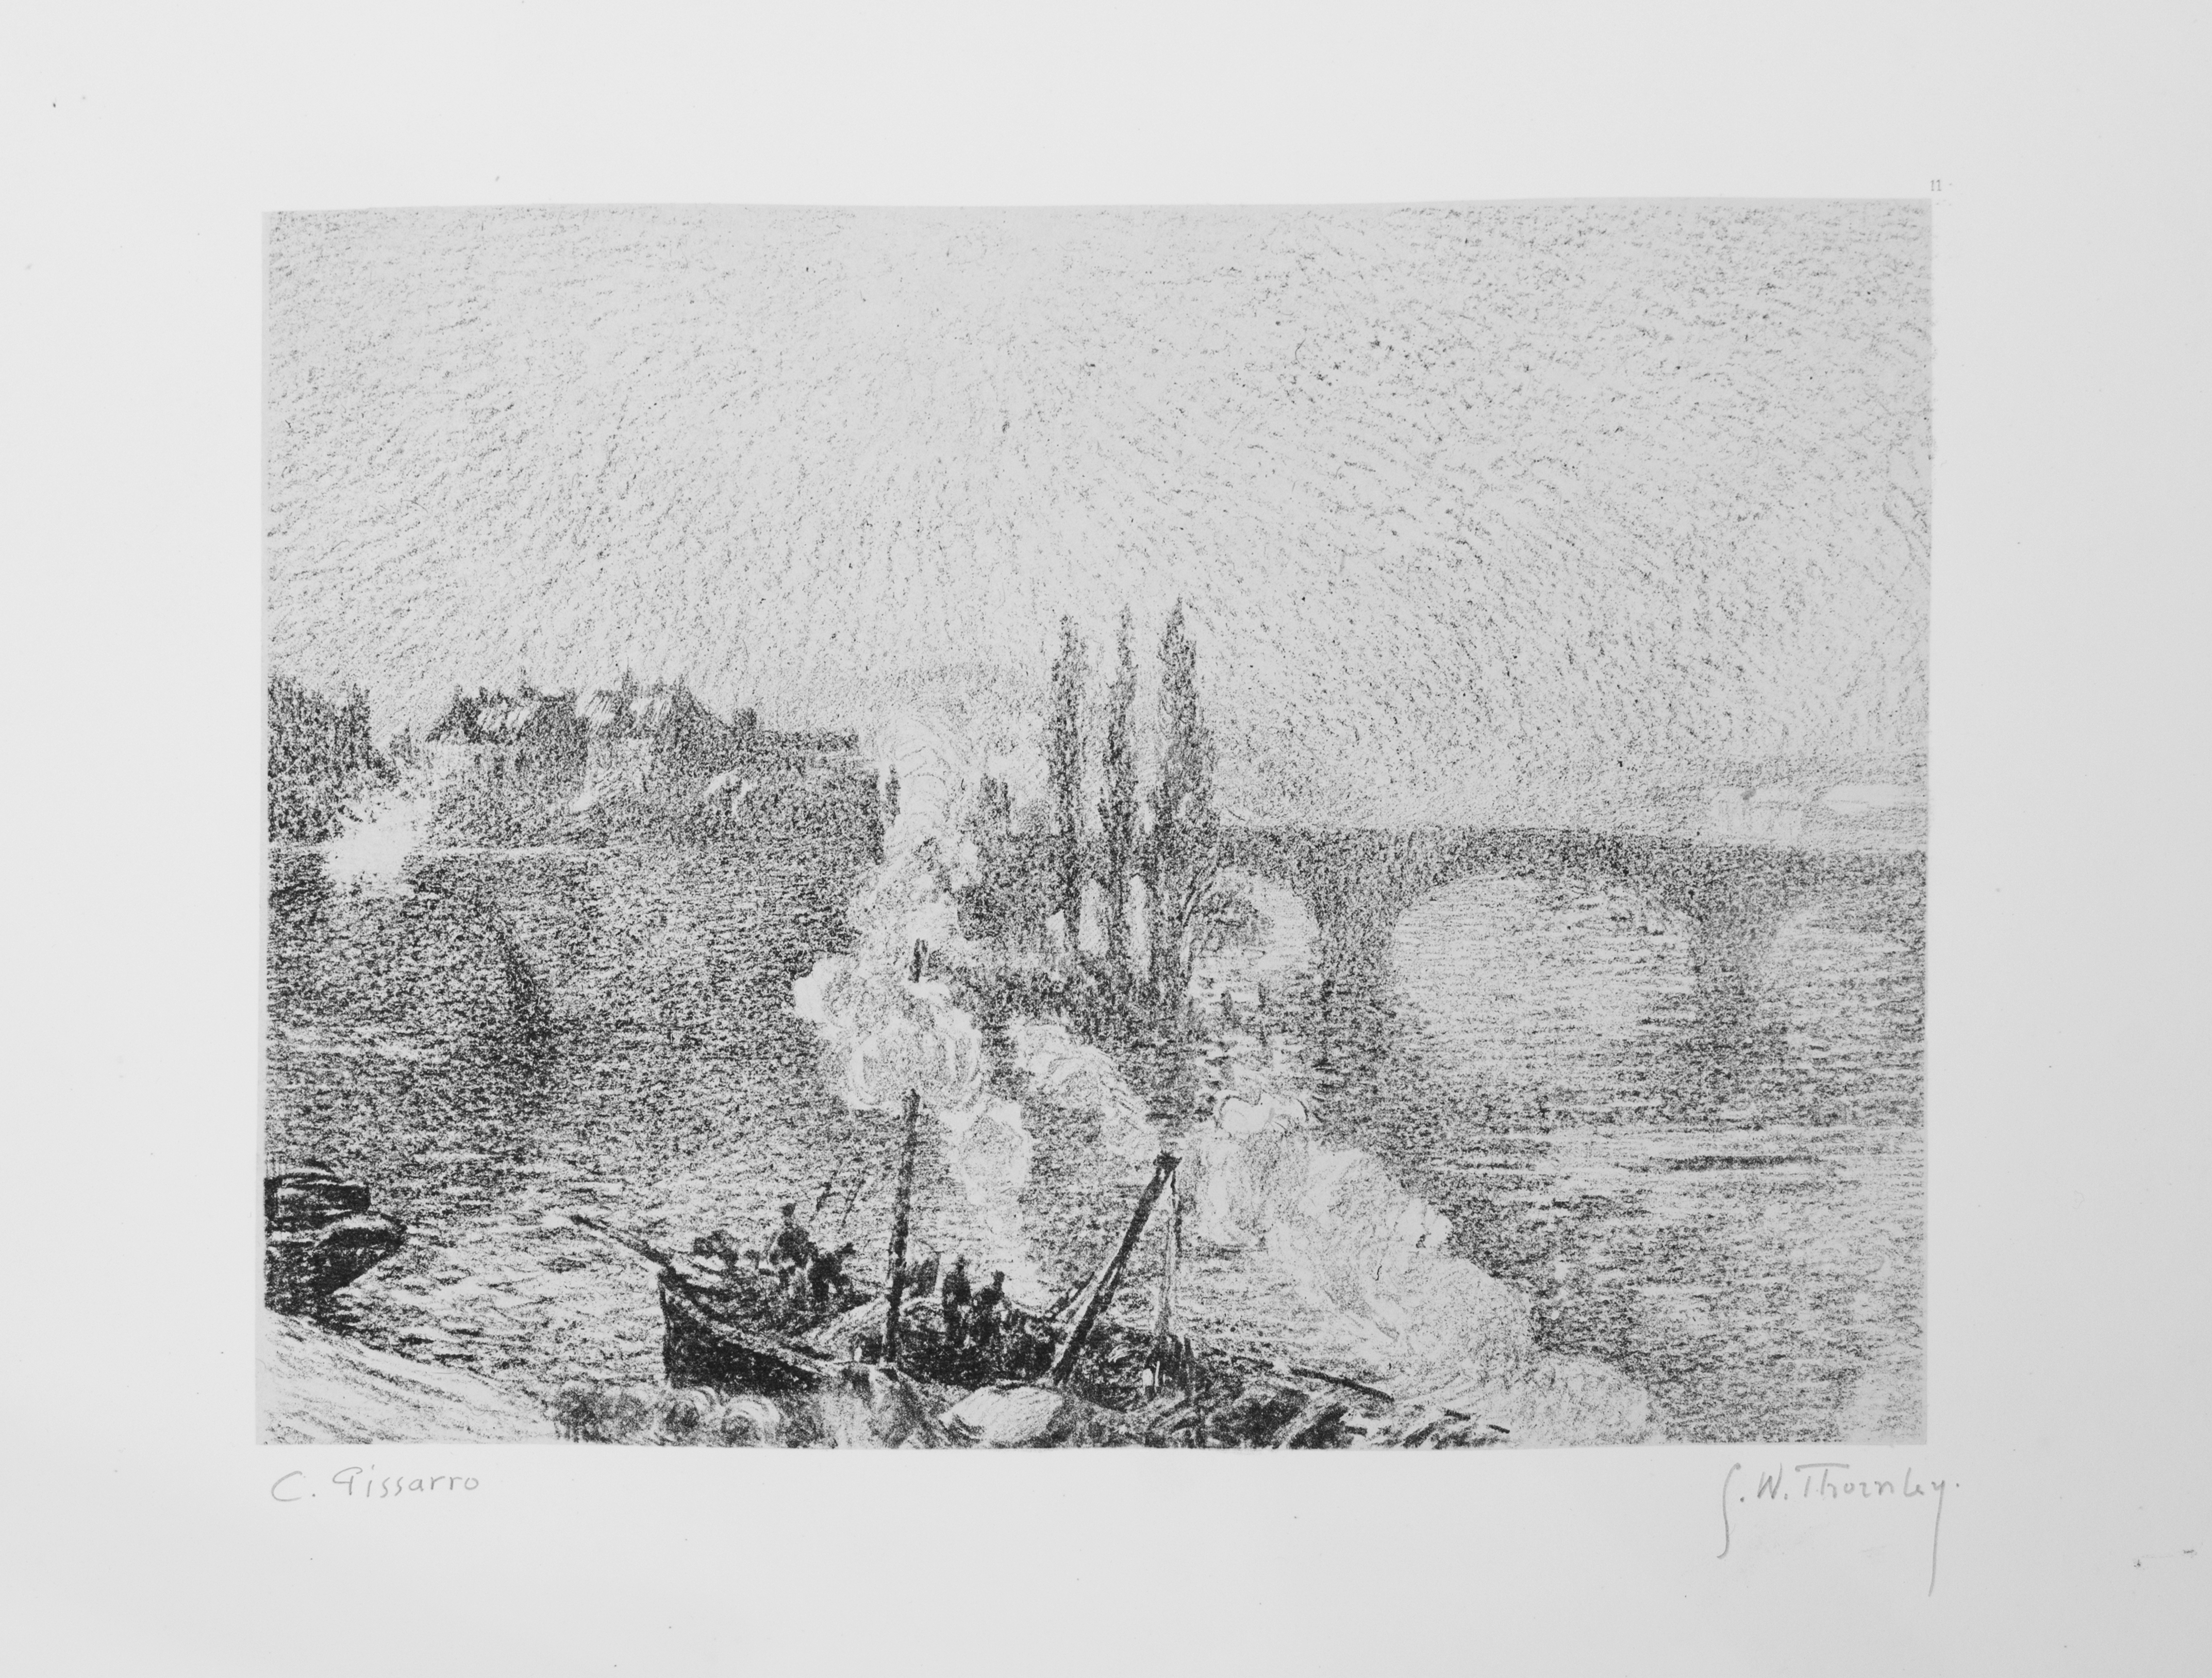 Pissarro / Thornley, "Ponts a Rouen," c. 1900, Lithograph, 8 1/4 x 10 3/8 in. 